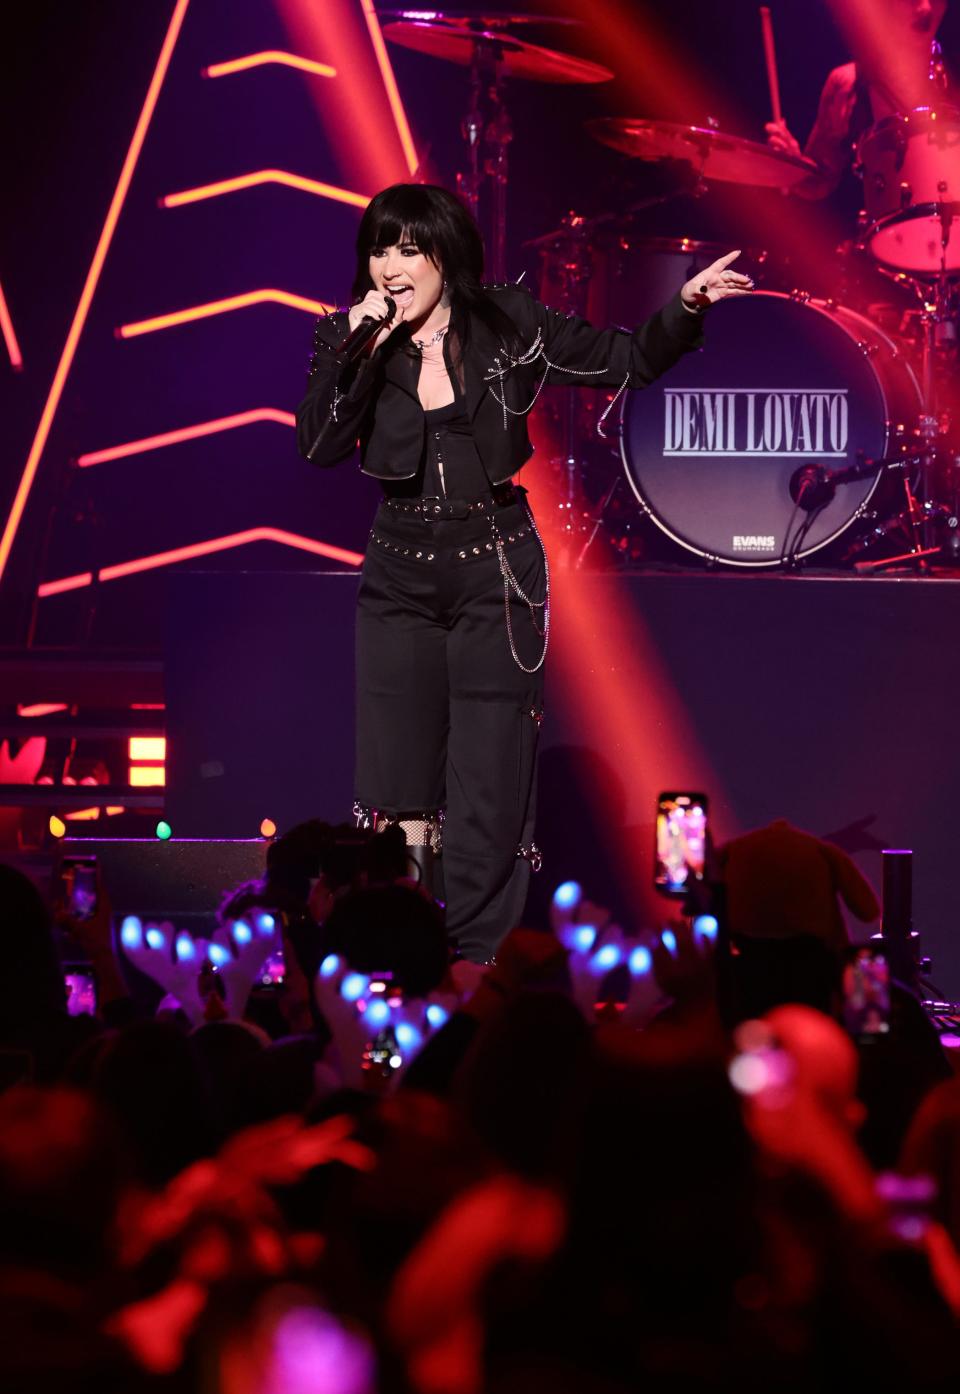 Demi Lovato performs Dec. 9 during Z100's iHeartRadio Jingle Ball 2022 at Madison Square Garden in New York City.